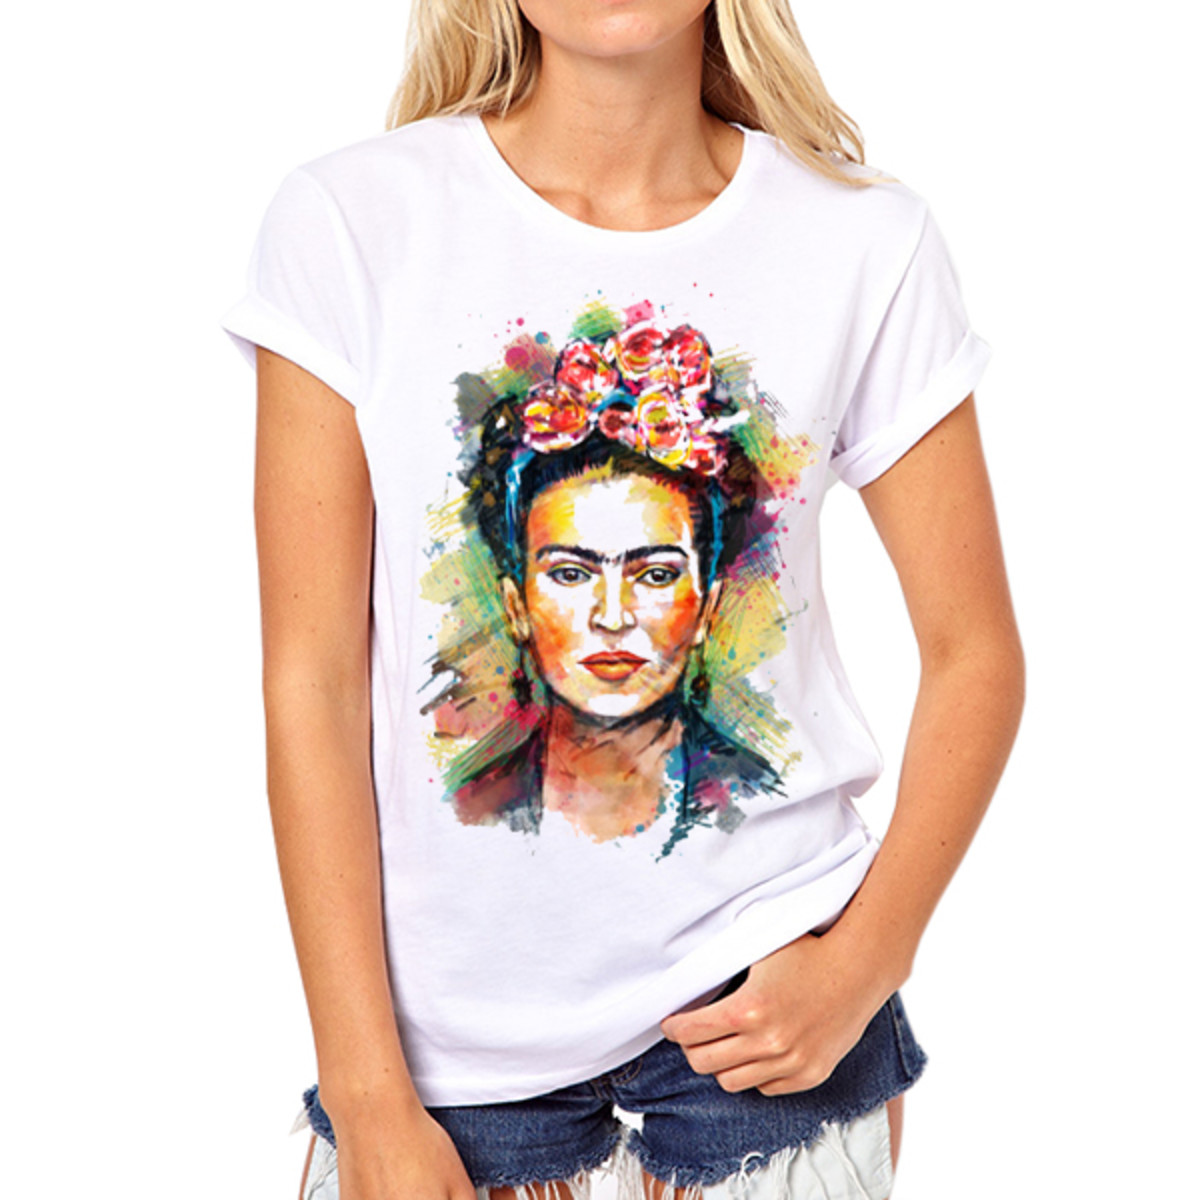 Only one example of the endless Frida merchandise for sale